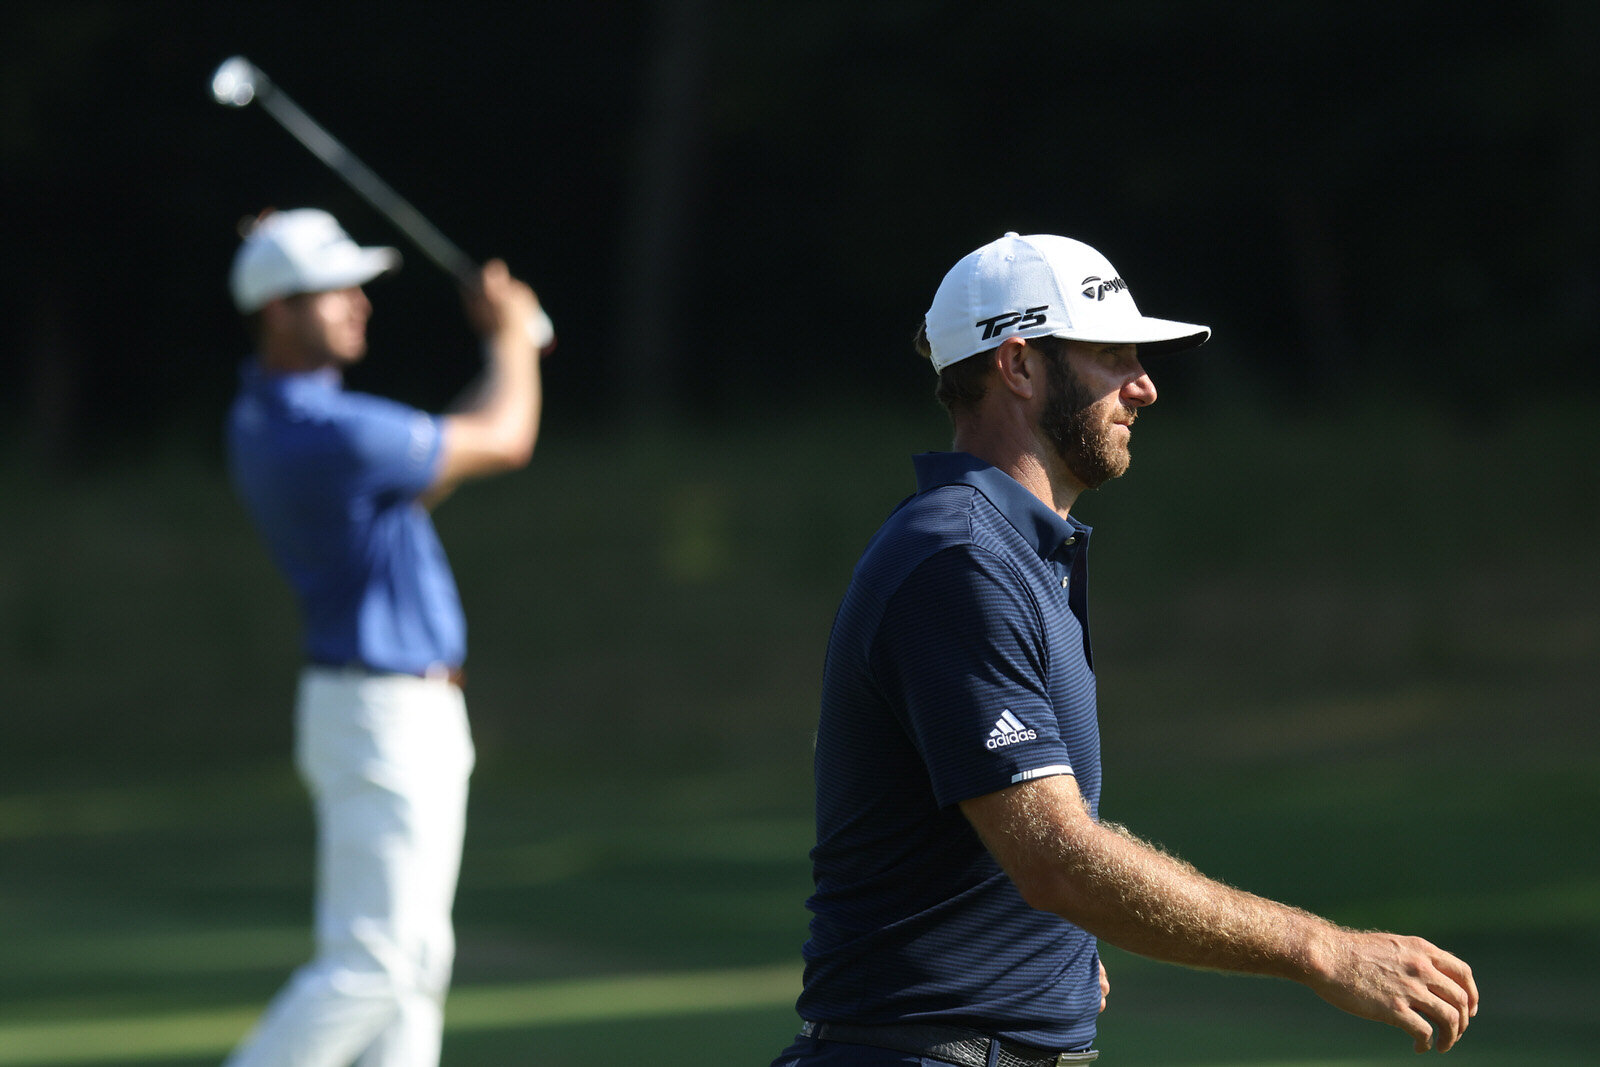  NORTON, MASSACHUSETTS - AUGUST 23: Dustin Johnson of the United States walks by as Harris English of the United States hits his second shot on the ninth hole during the final round of The Northern Trust at TPC Boston on August 23, 2020 in Norton, Ma